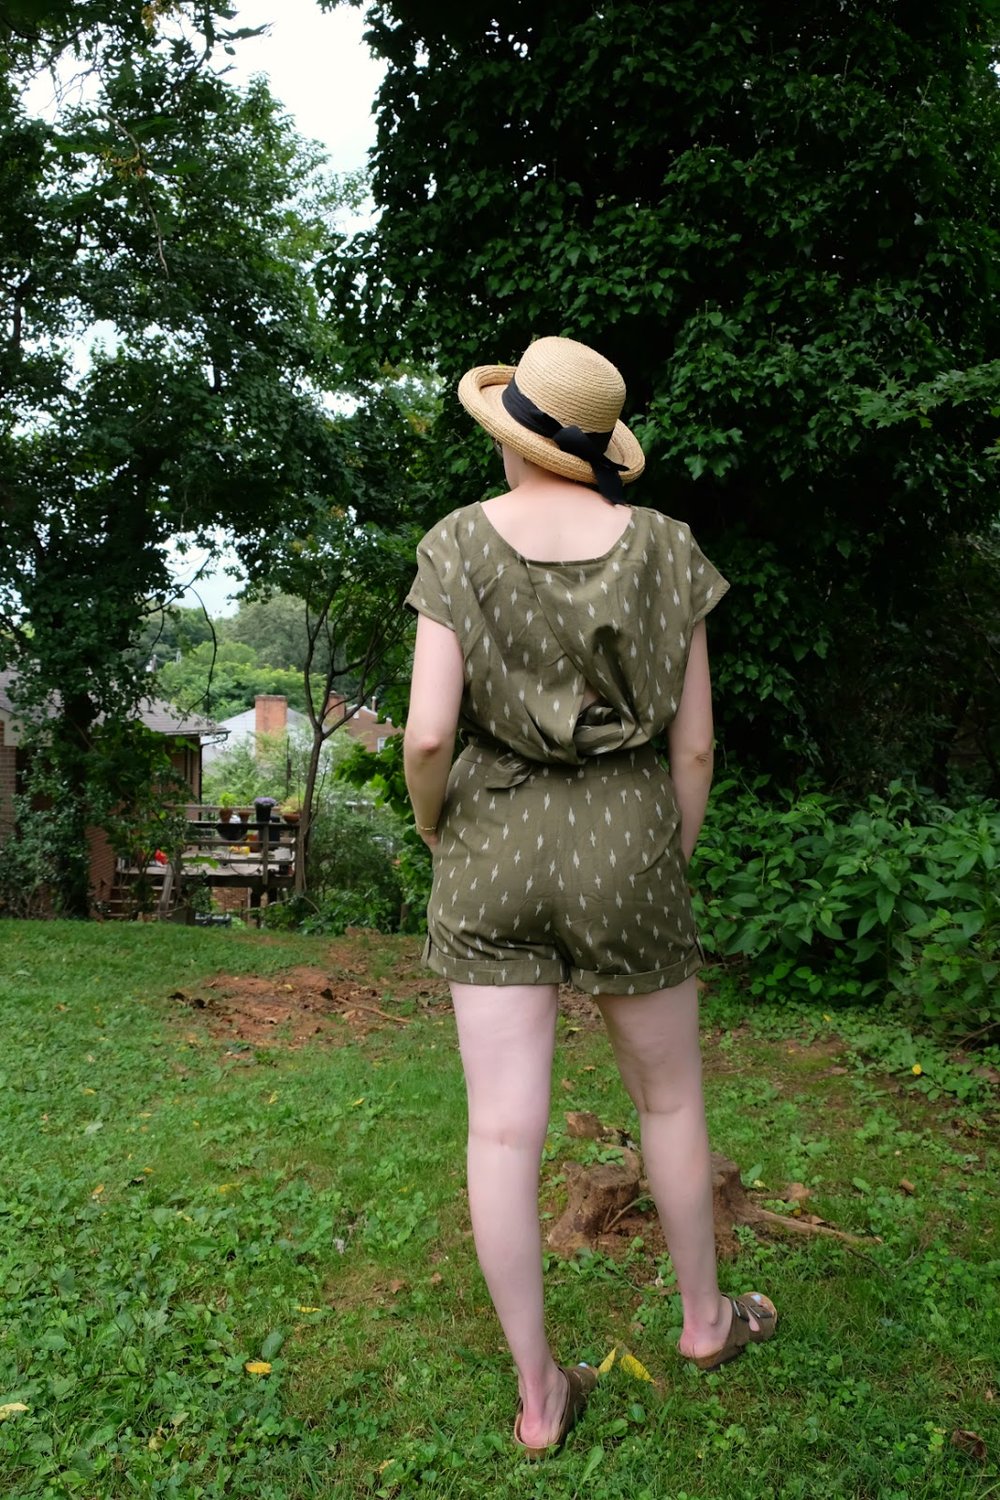 Leah stands in yard wearing a green romper and straw hat - Cultural Appropriation in Fashion